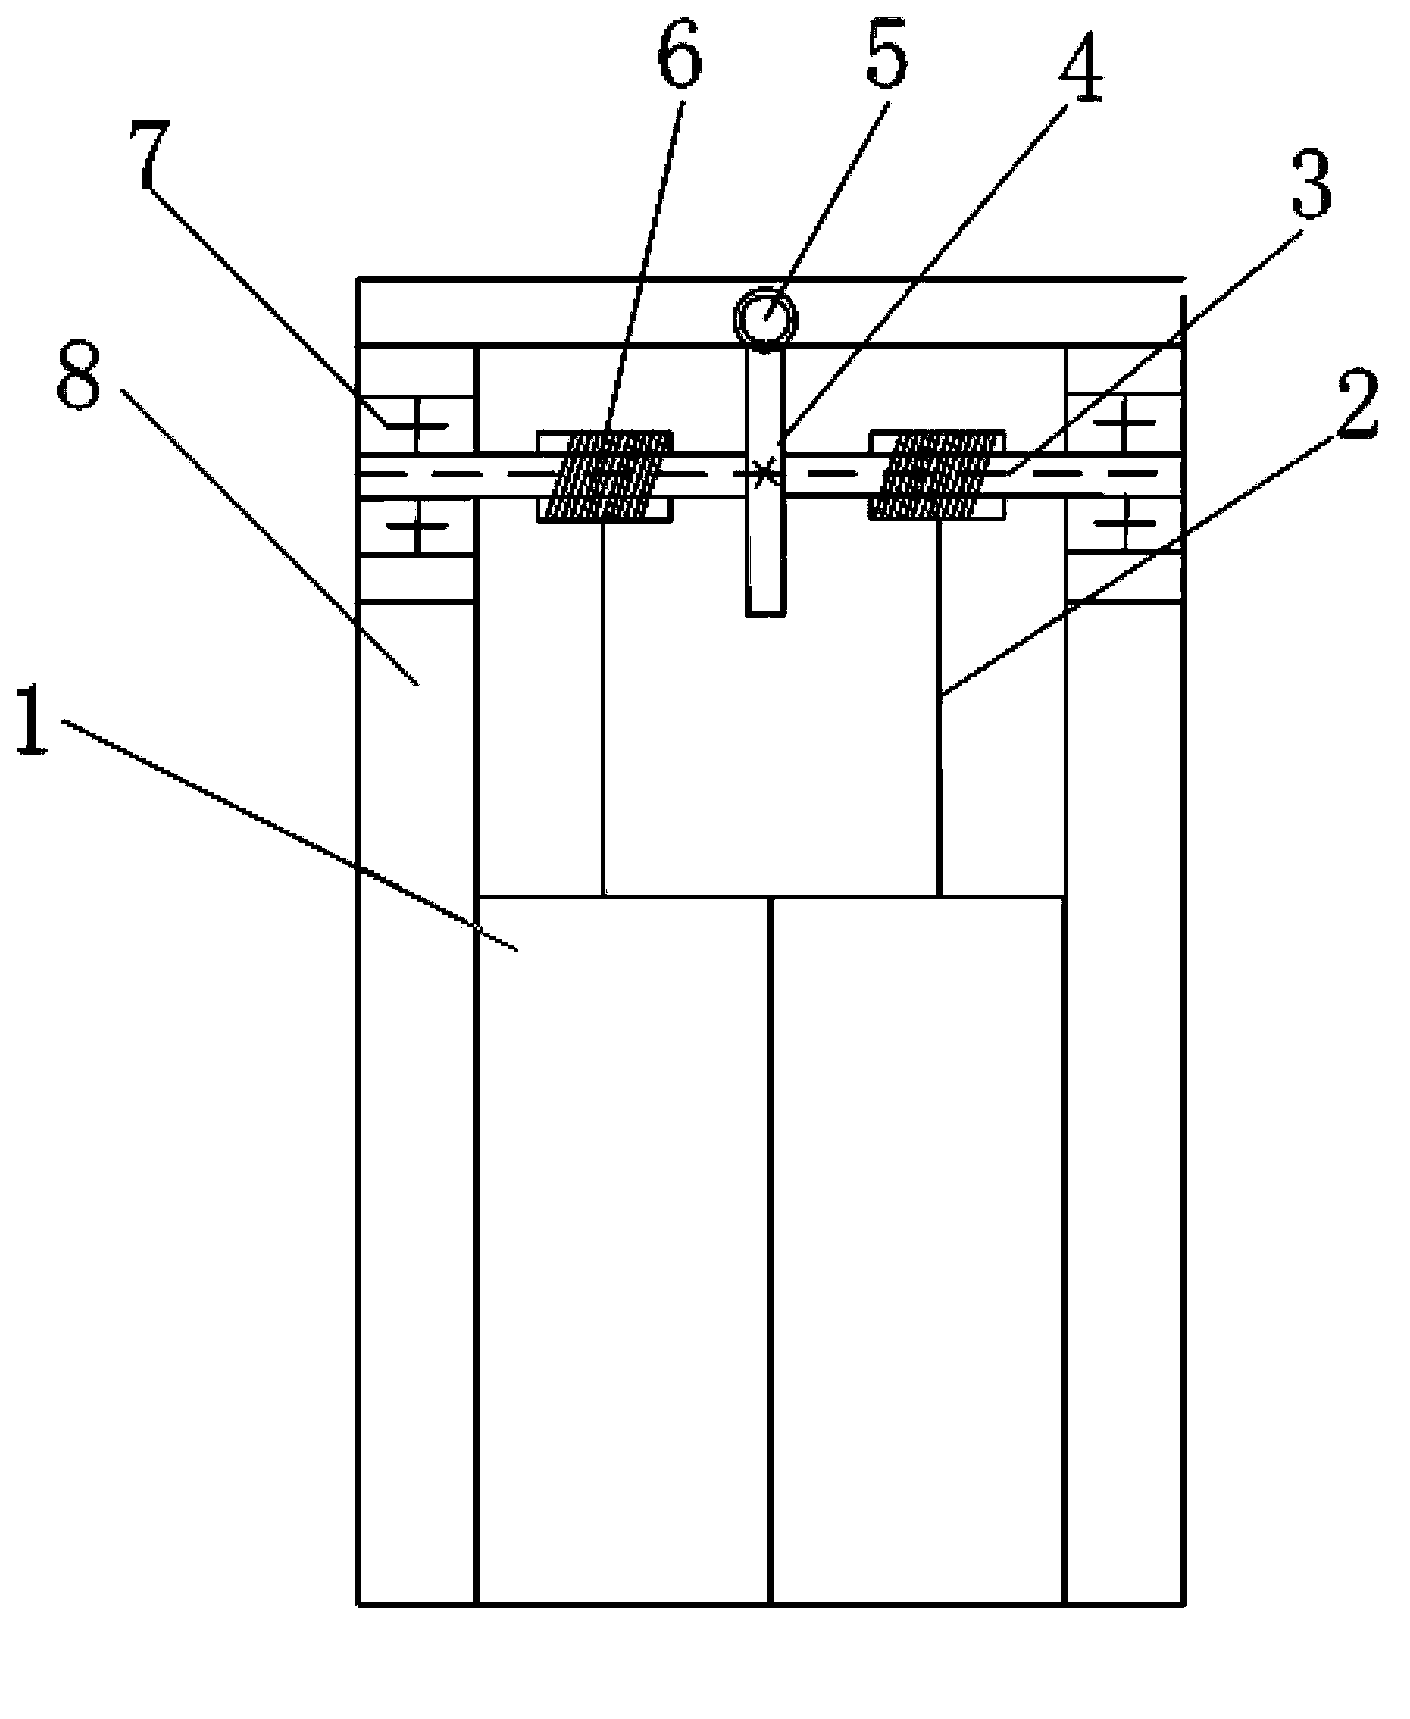 Power system of road overhead parking device